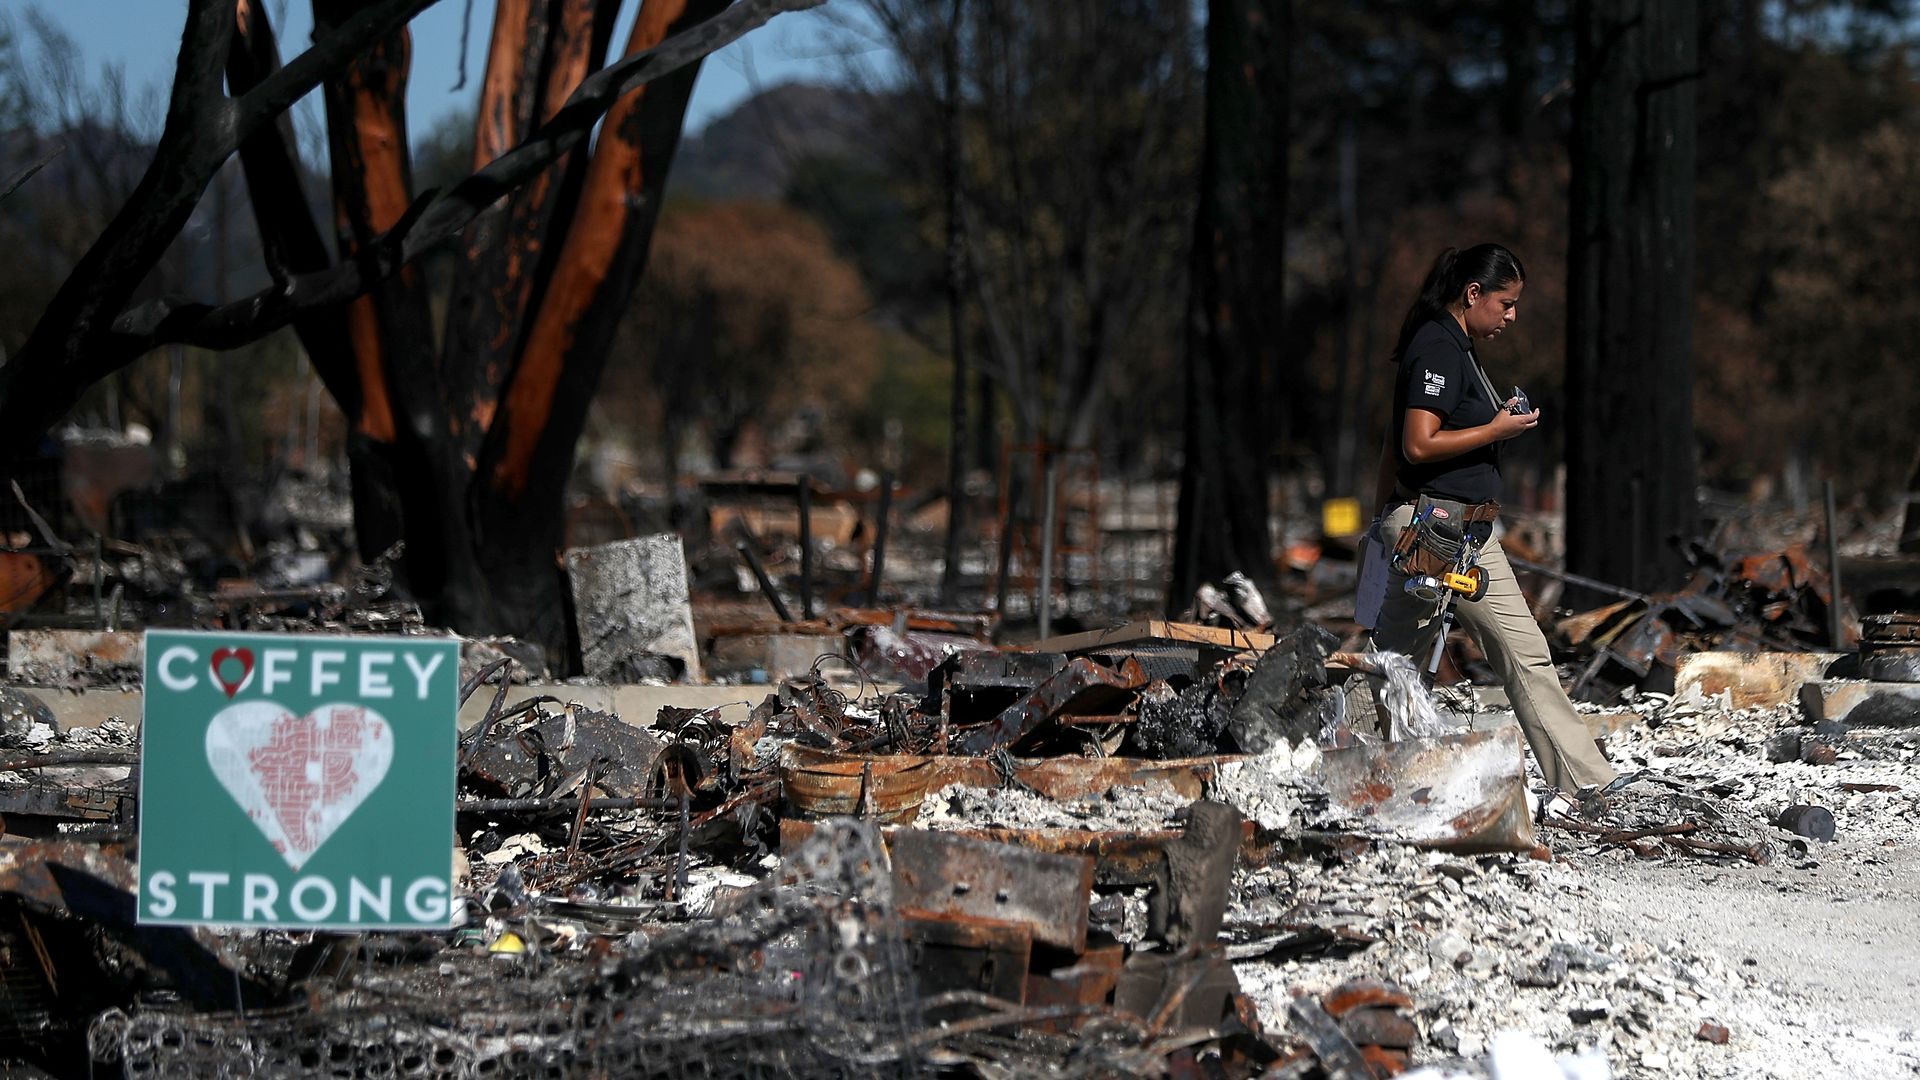 An insurance adjuster walks through a Coffey Park home that was destroyed by the Tubbs Fire on October 23, 2017 in Santa Rosa, California. 